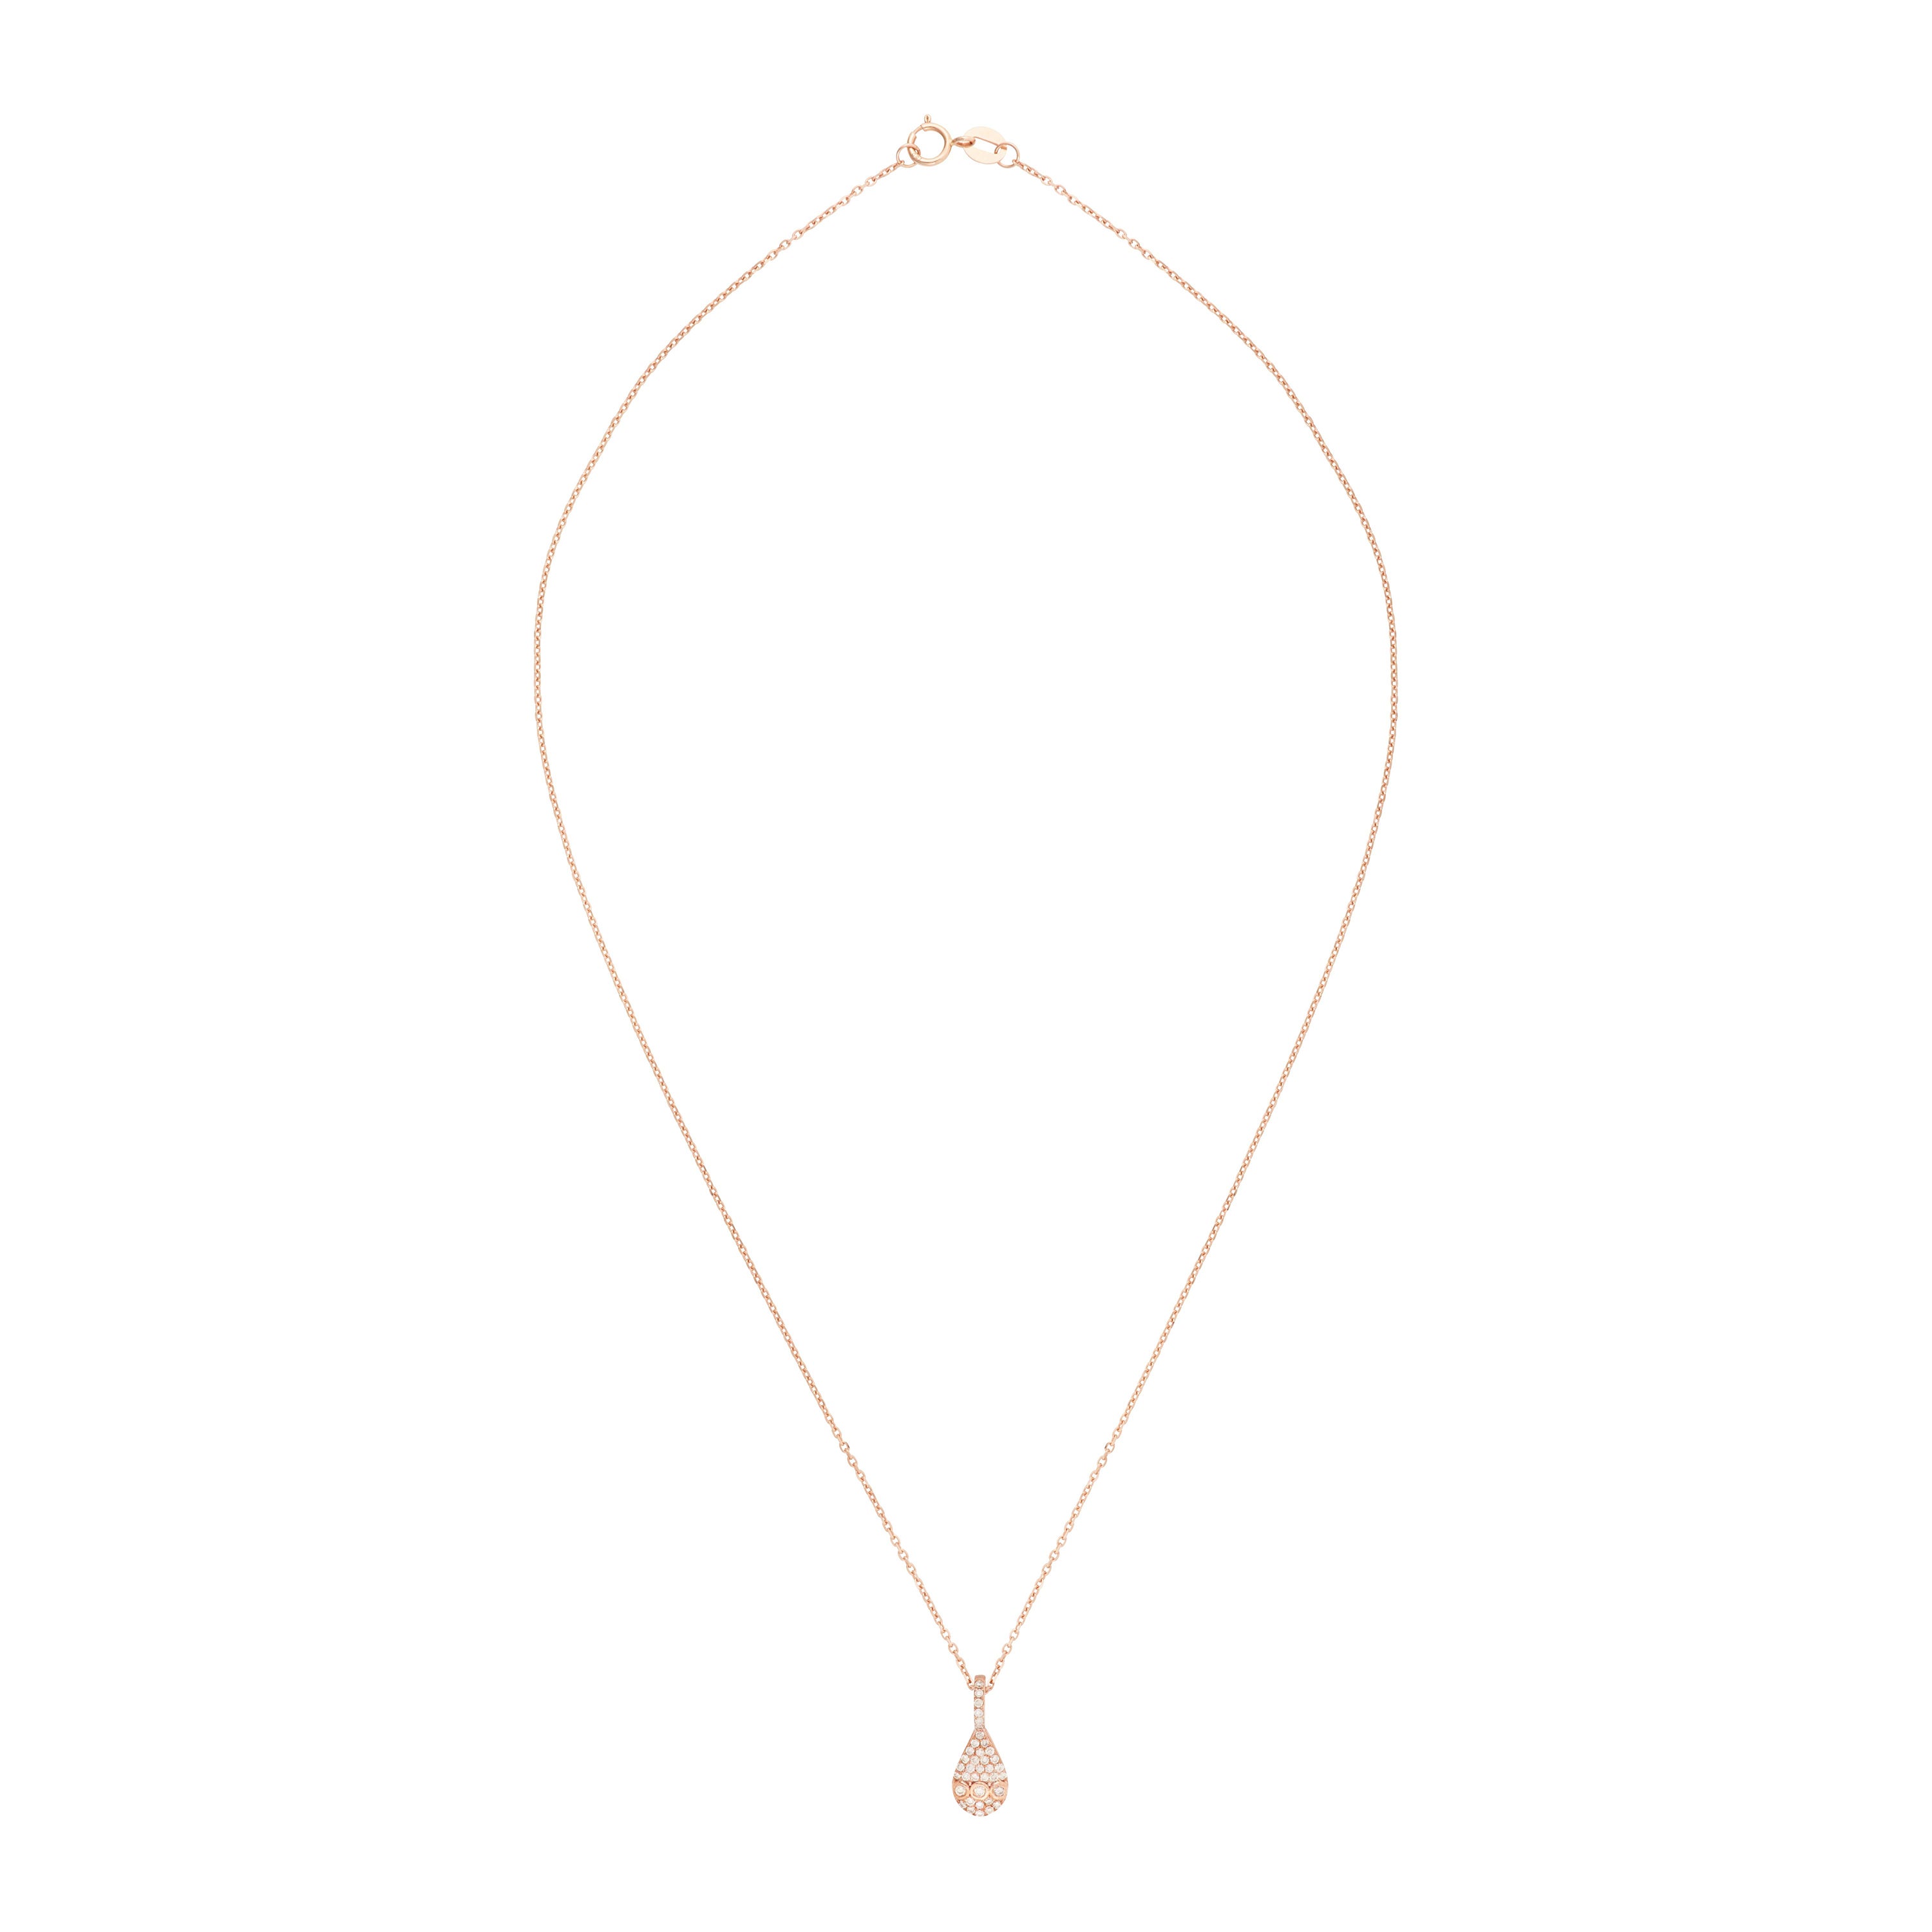 Adorned with a captivating drop silhouette, this dazzling necklace accentuates the beauty of every skin tone, with its sparkling symphony of flattering champagne diamonds set in 18K rose gold. Emanating a soft elegance, like a water droplet catching